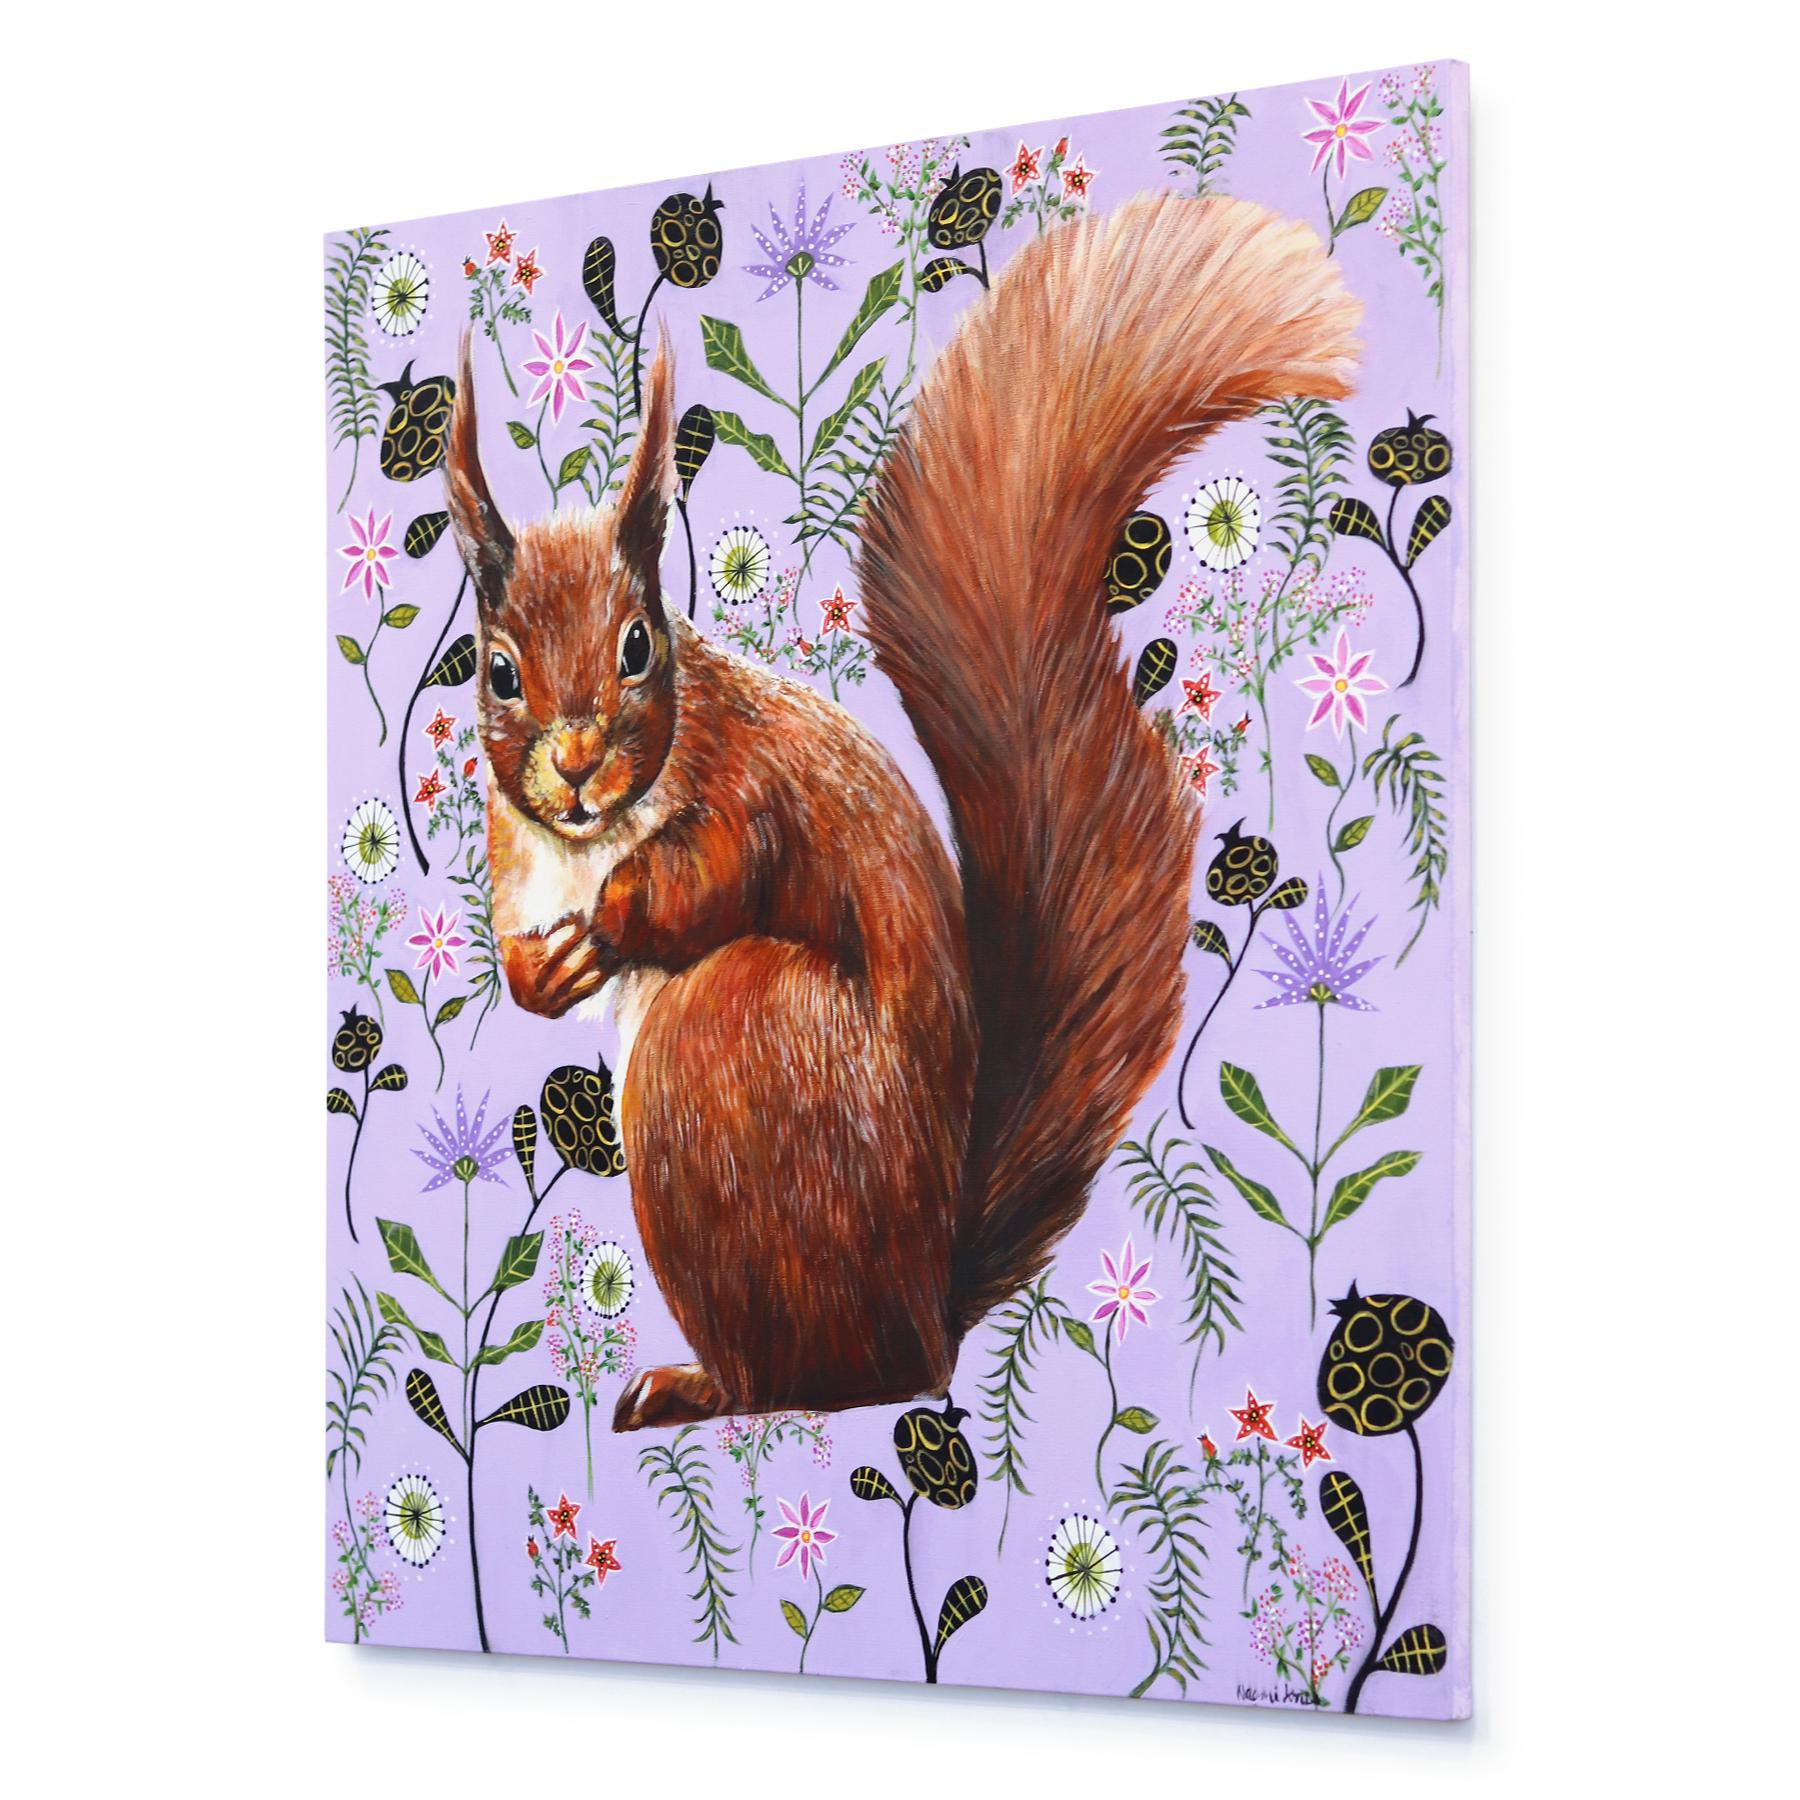 Red Squirrel on Lavender  - Original Vivid Figurative Animal Painting on Canvas For Sale 1